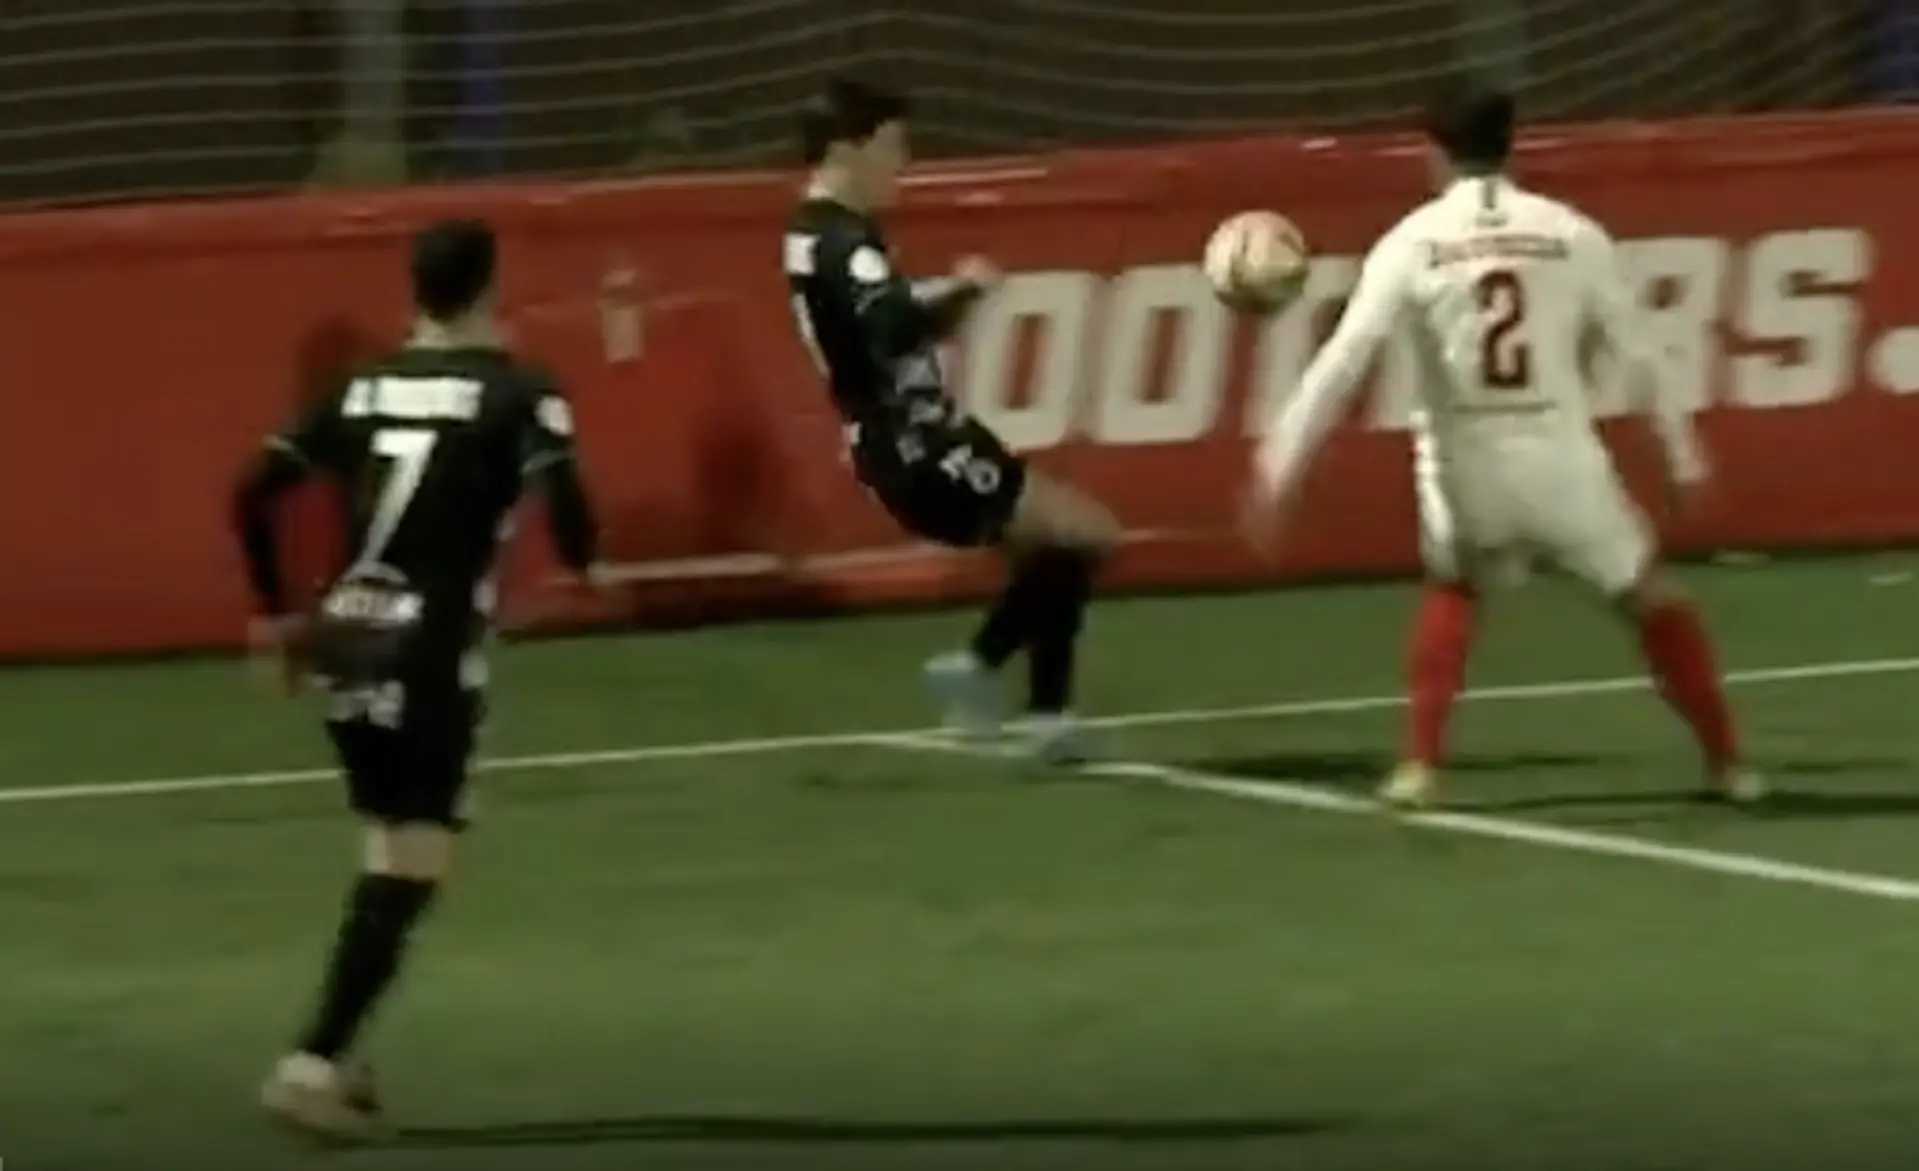 72a4f06d d2e8 4353 b1cd 79b8e3480c93?width=1920&quality=75 Barca's new signing Pablo Torre destroys two opponents with crazy skills in 5 seconds